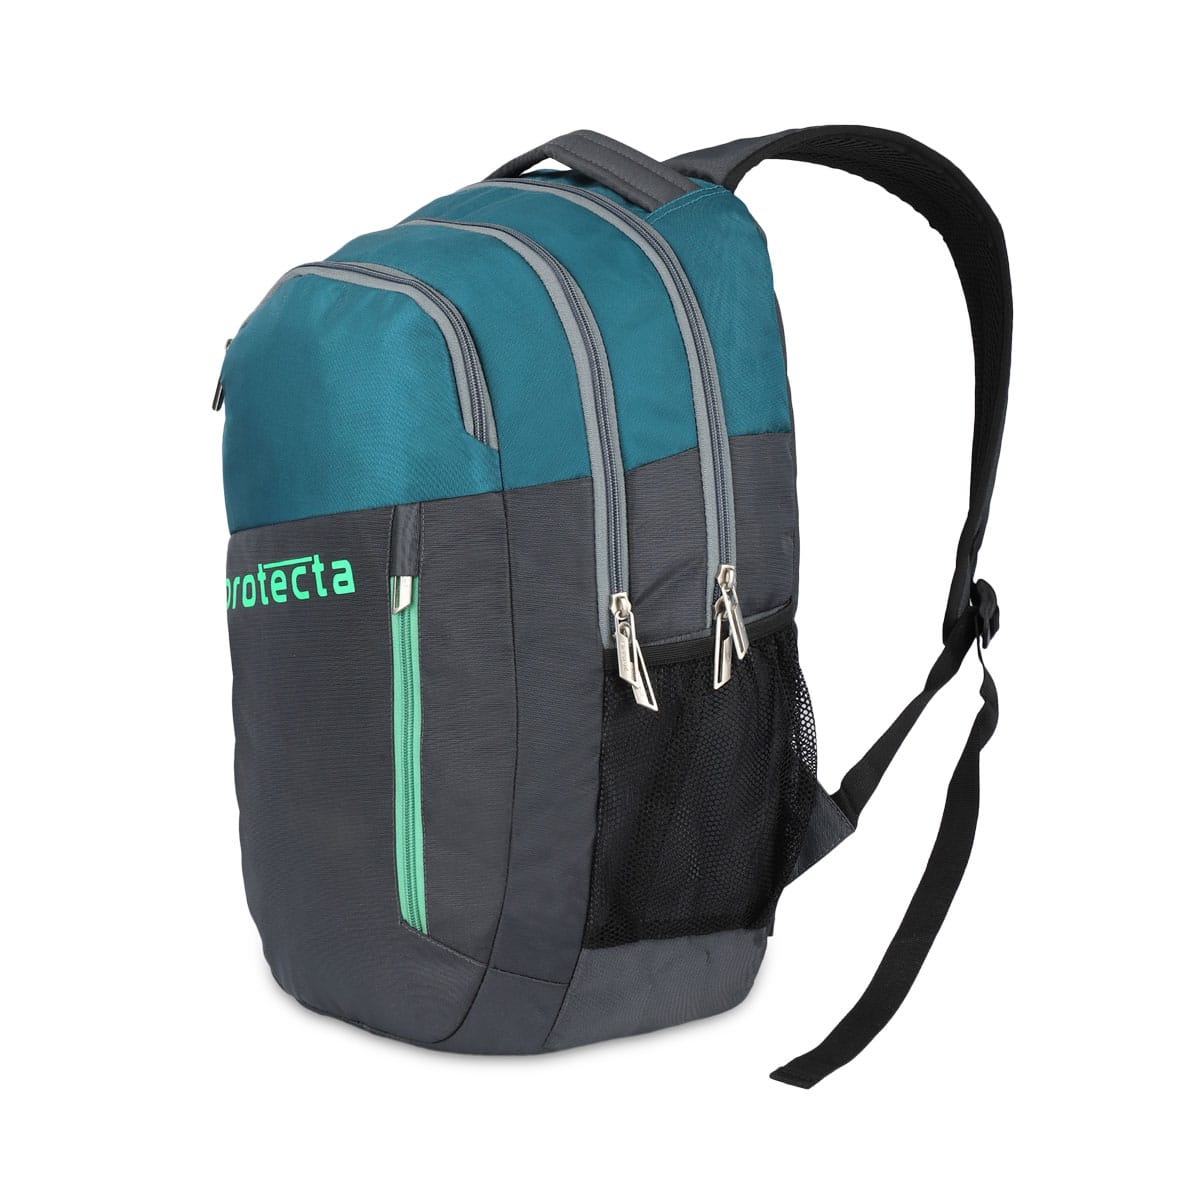 Grey-Astral| Protecta Twister Laptop Backpack-1